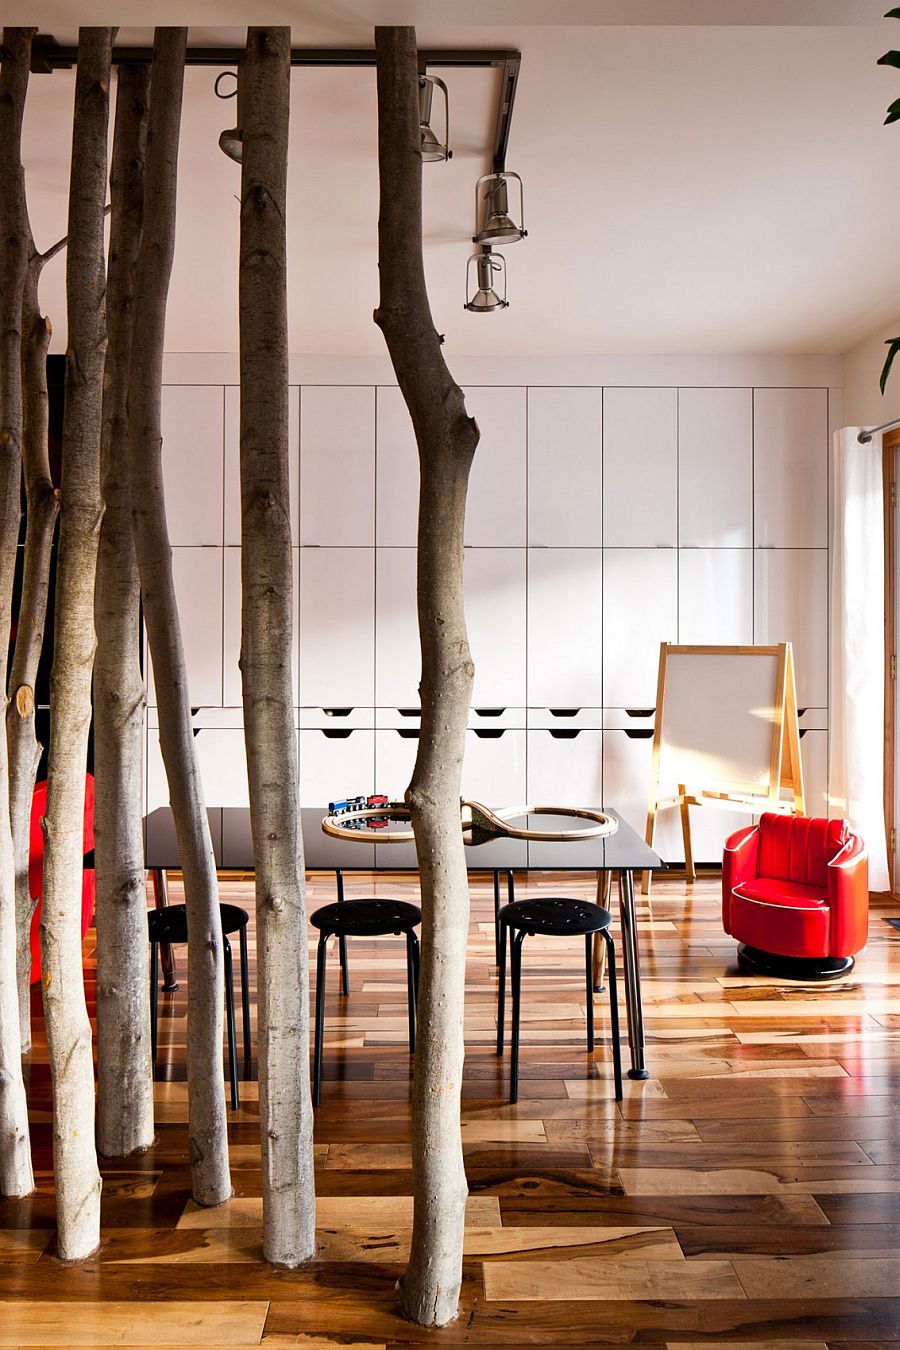 Use of tree trunks to create a natural, whimsical partition in the dining area